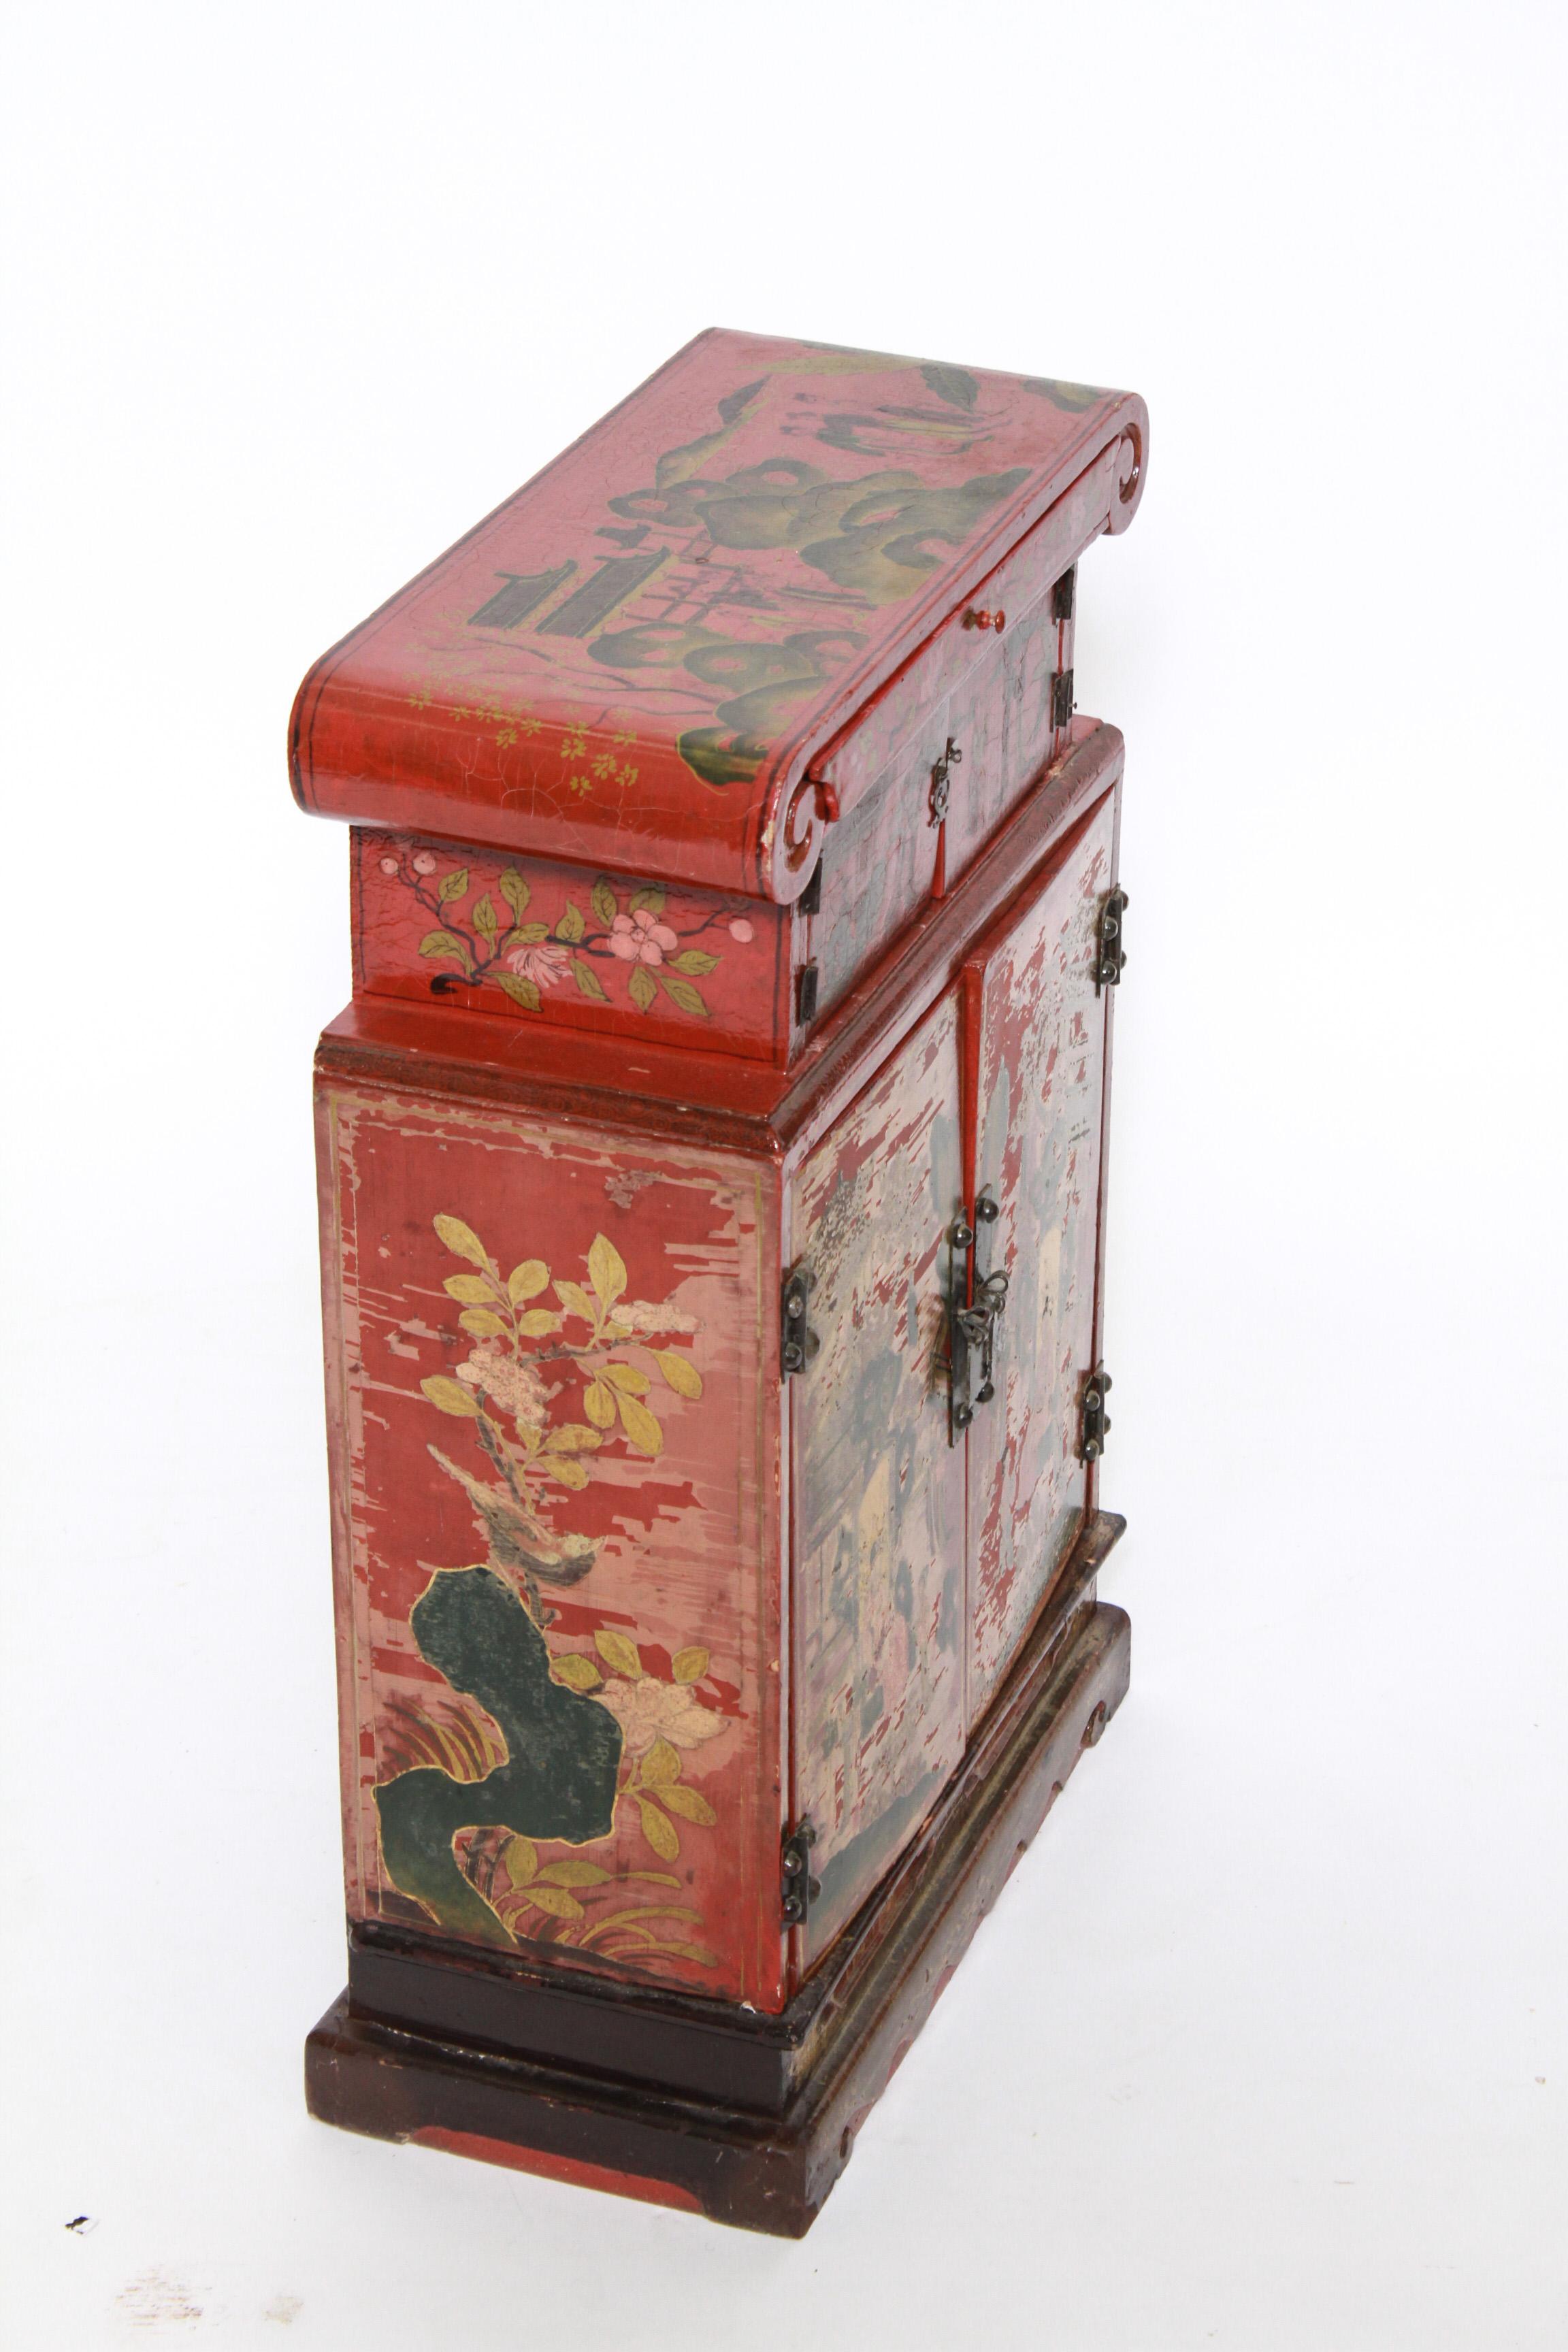 Hand-Painted Chinoiserie Diminutive Cabinet with Painted Scenes